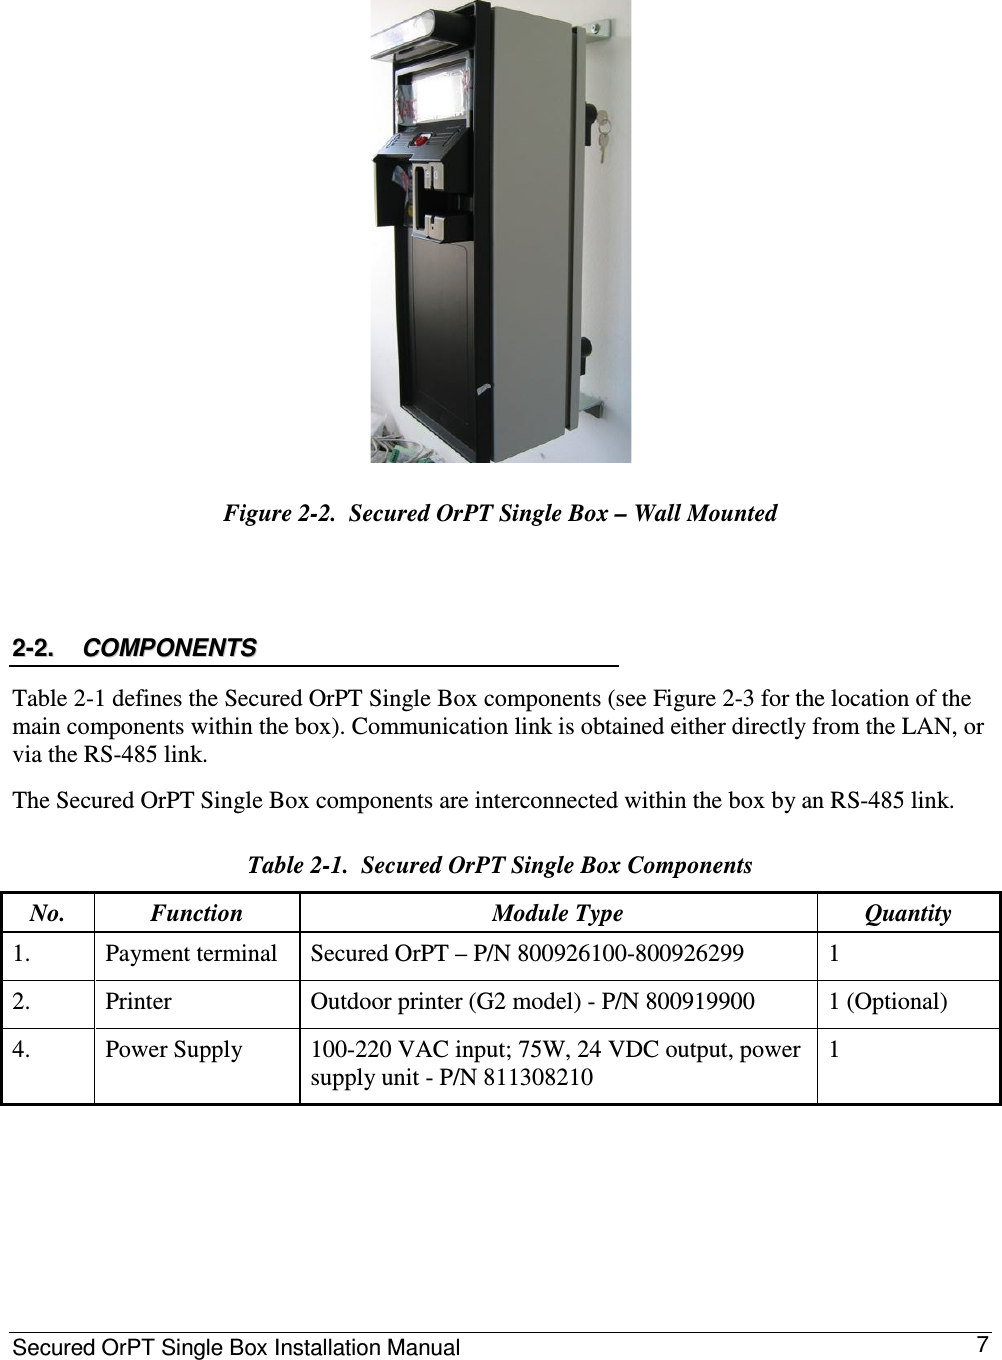 Secured OrPT Single Box Installation Manual      7  Figure  2-2.  Secured OrPT Single Box – Wall Mounted  22--22..  CCOOMMPPOONNEENNTTSS    Table  2-1 defines the Secured OrPT Single Box components (see Figure  2-3 for the location of the main components within the box). Communication link is obtained either directly from the LAN, or via the RS-485 link.  The Secured OrPT Single Box components are interconnected within the box by an RS-485 link. Table  2-1.  Secured OrPT Single Box Components No.   Function   Module Type   Quantity  1.   Payment terminal   Secured OrPT – P/N 800926100-800926299  1  2.   Printer   Outdoor printer (G2 model) - P/N 800919900   1 (Optional)  4.   Power Supply   100-220 VAC input; 75W, 24 VDC output, power supply unit - P/N 811308210  1   